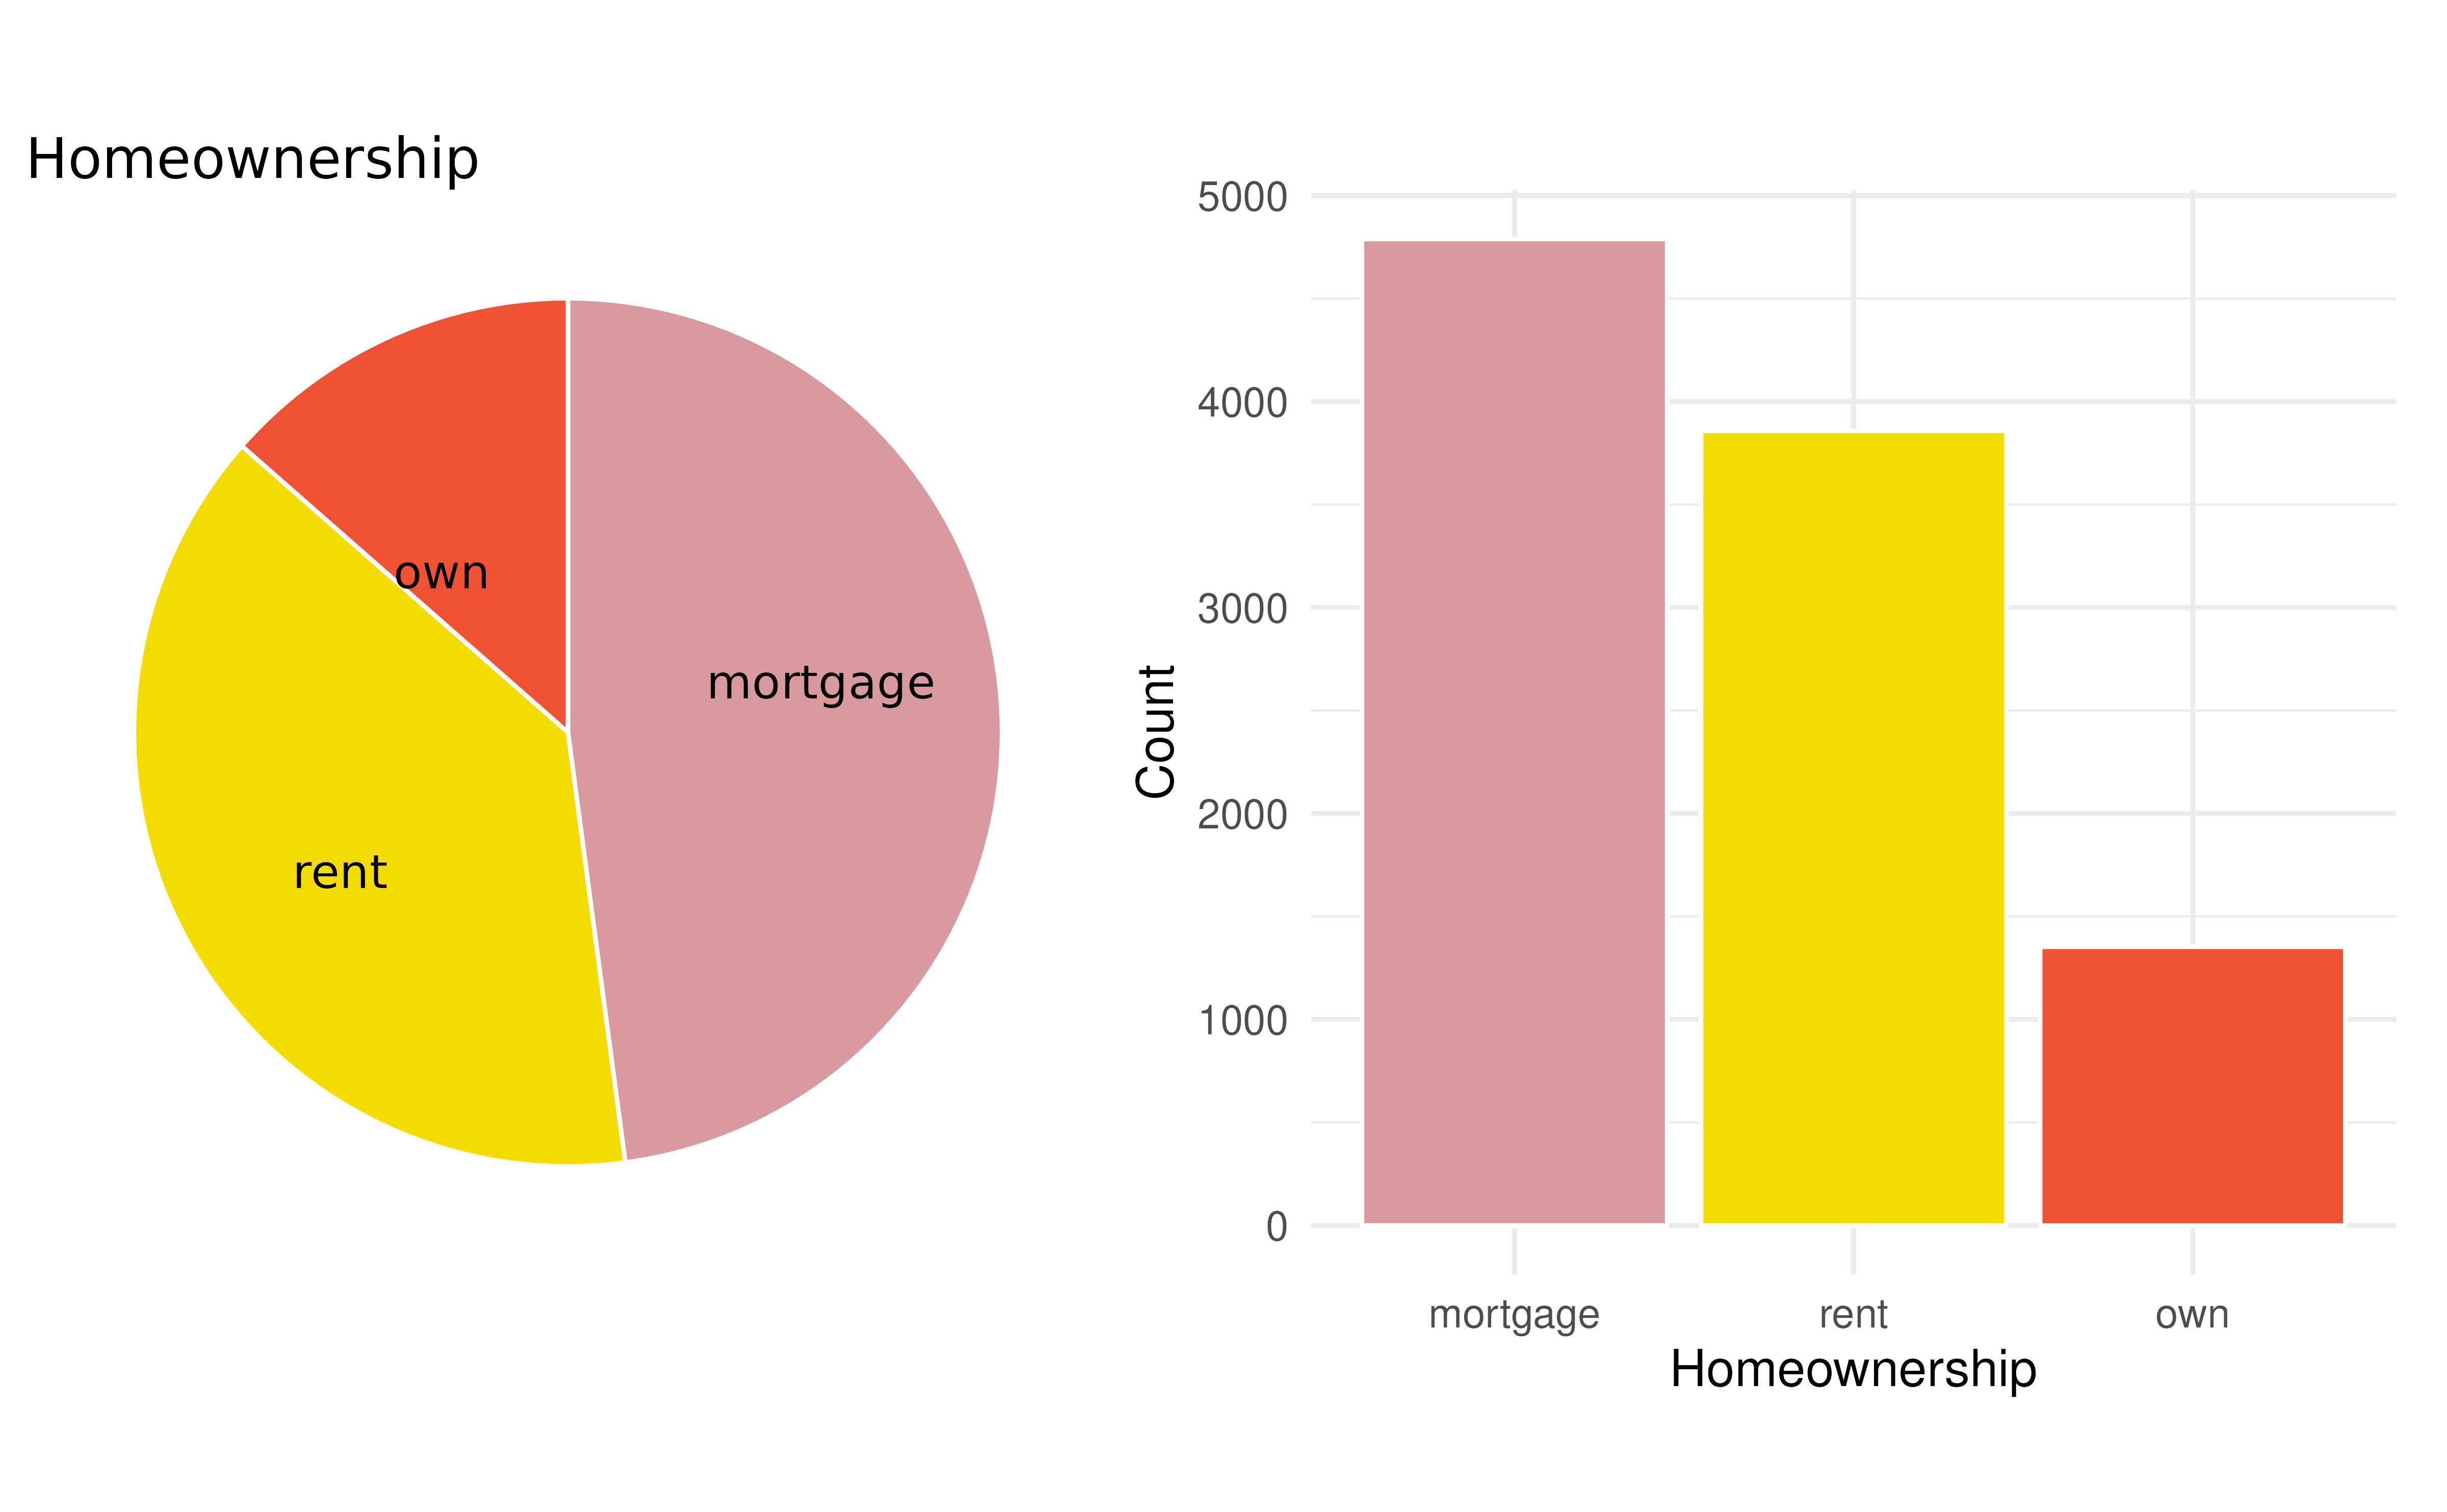 A pie chart and bar plot of homeownership.